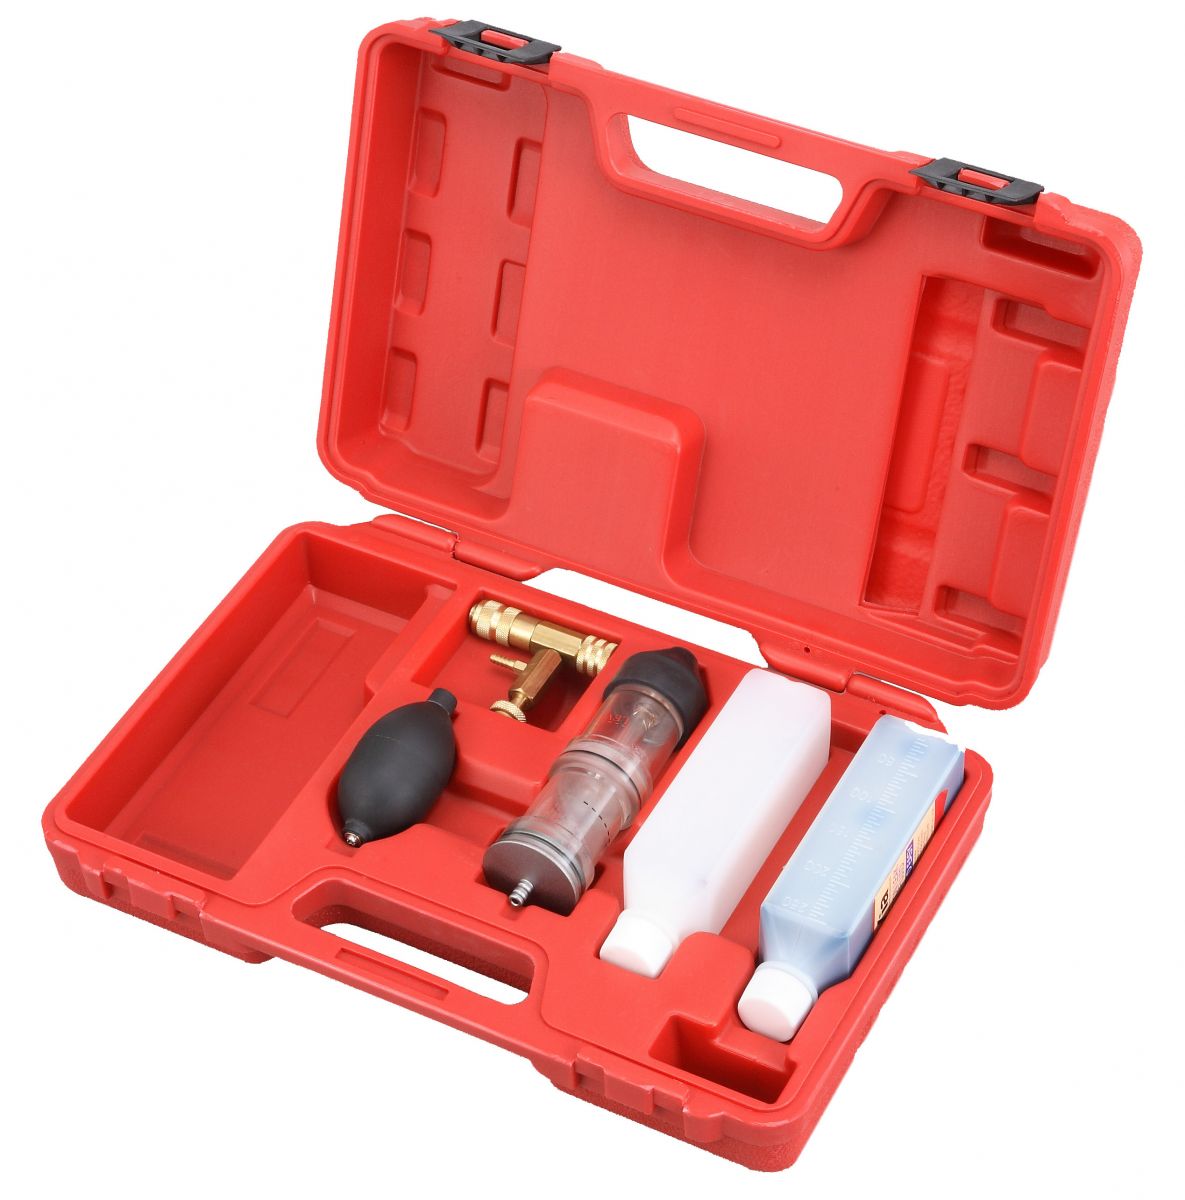 COMBUSTION GAS LEAK TESTER KIT WITH VERTICAL CHAMERS